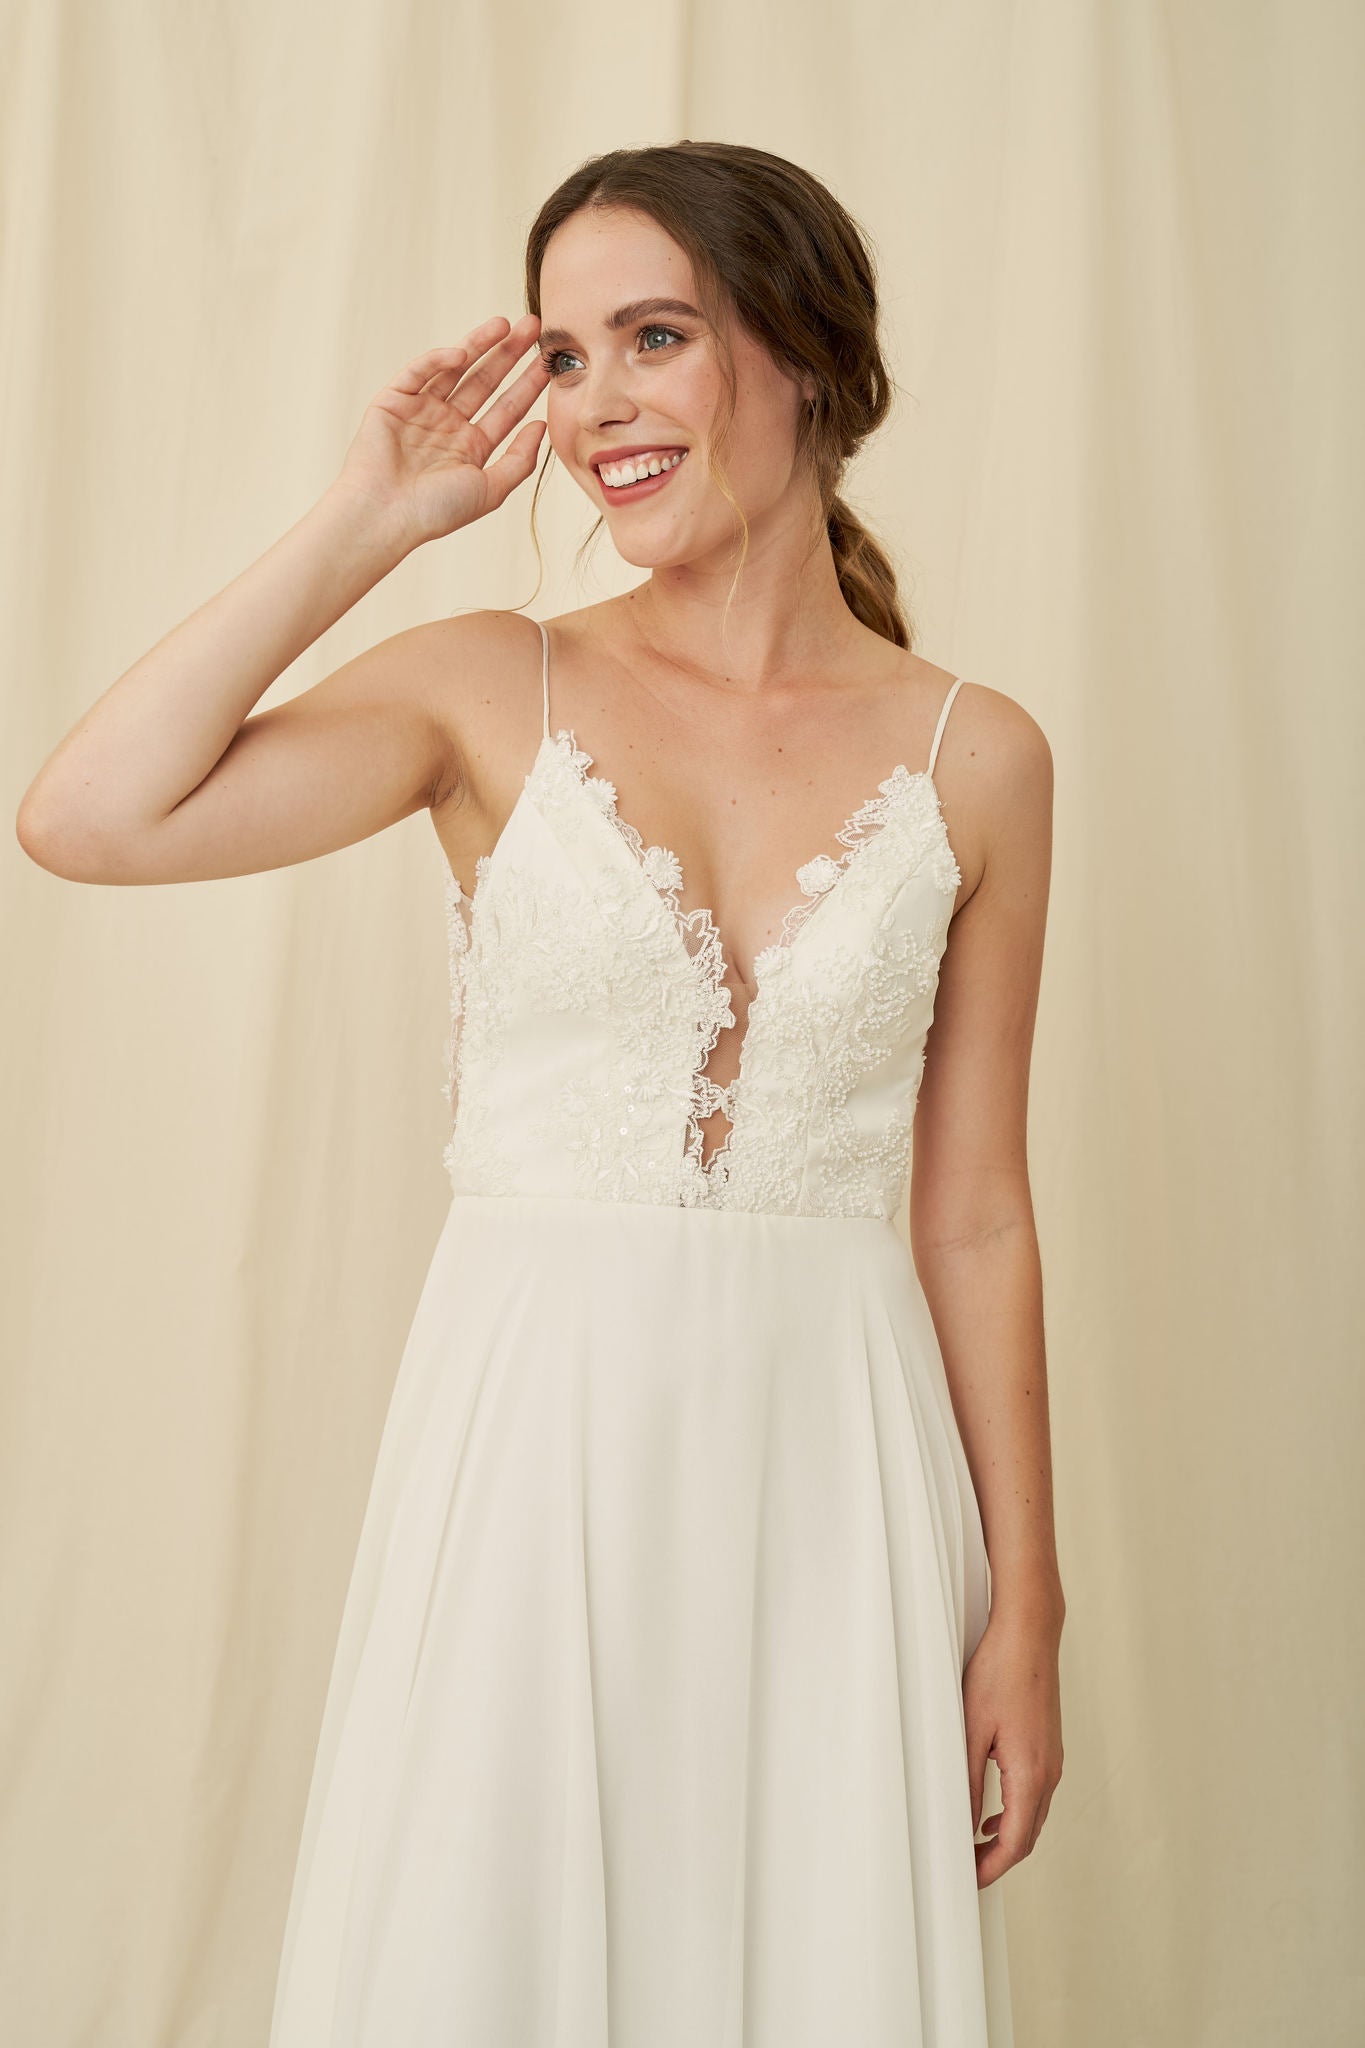 Flowy wedding dress with a low-cut lace bodice and sheer scoopback